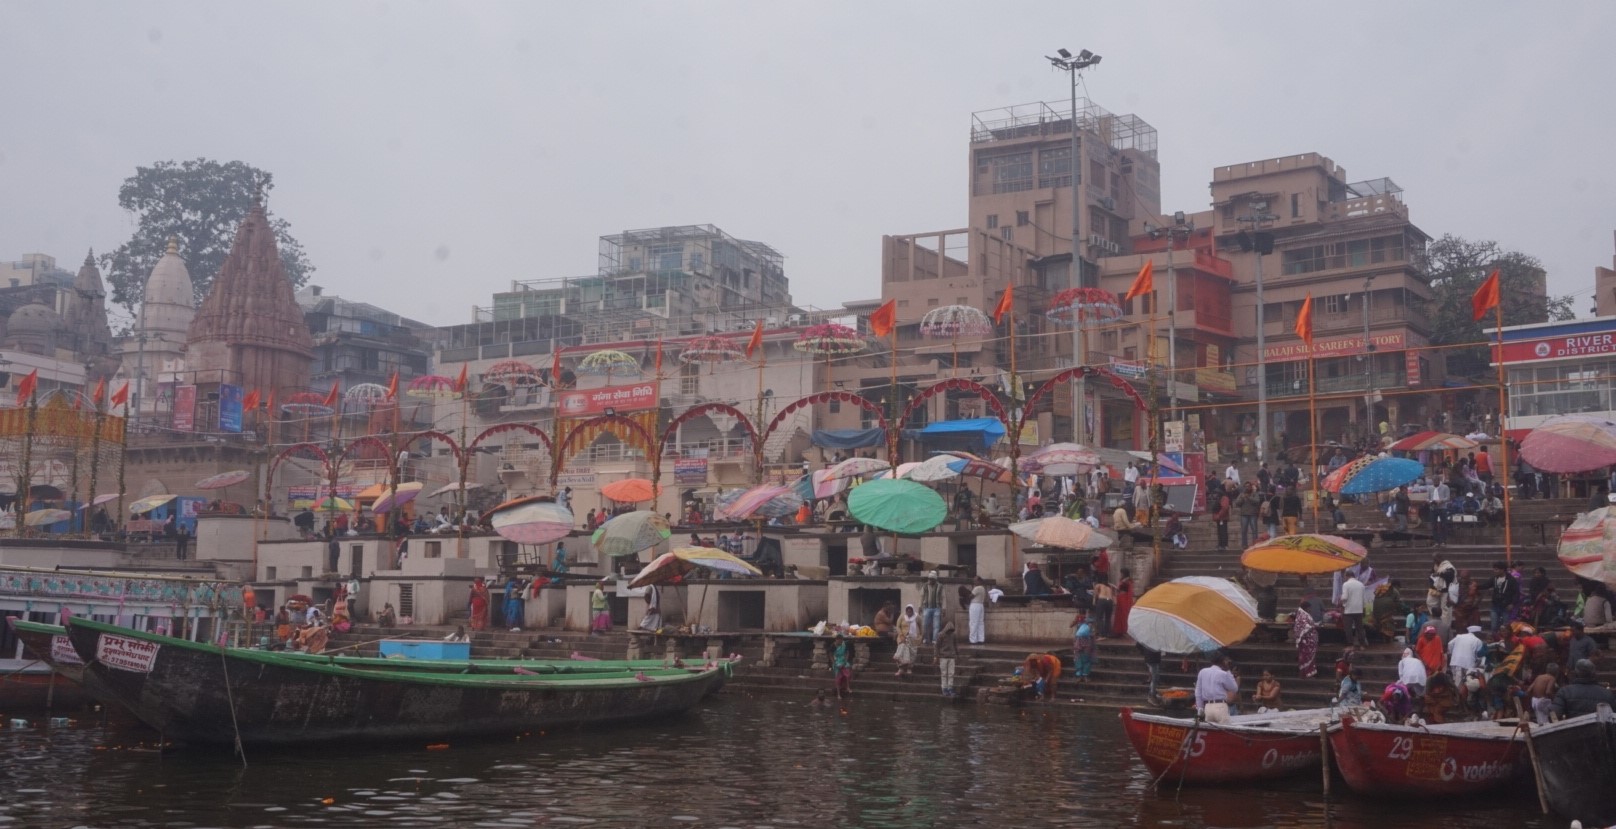 FC bacterial level in Ganga 3 to 12 times higher than permissible level